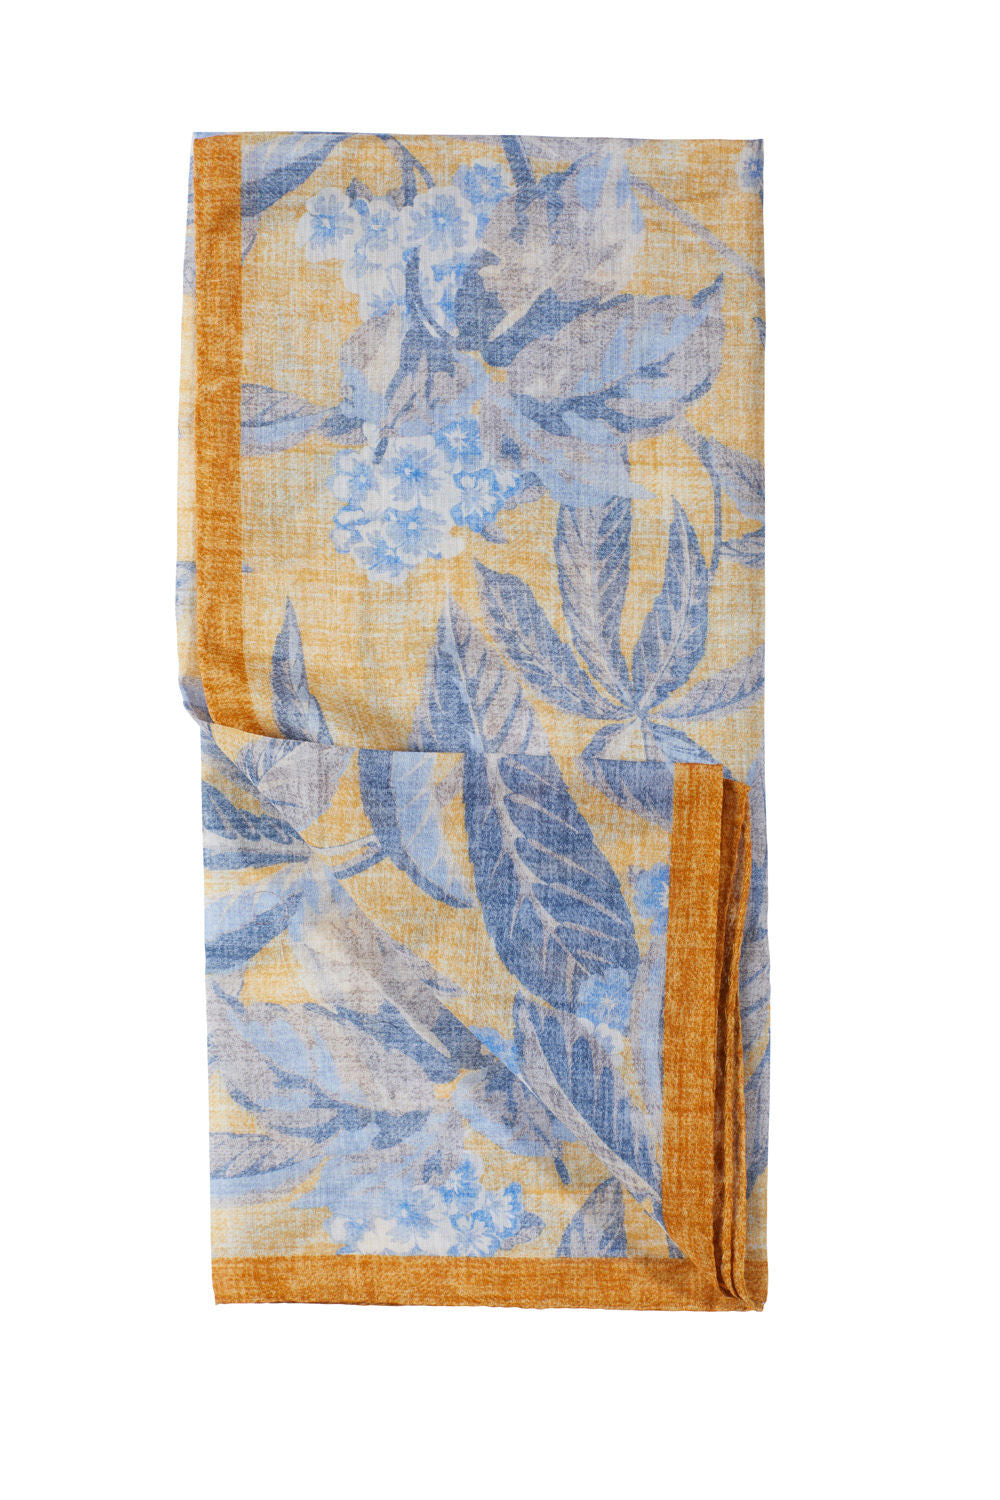 Leaf Voile Pattern Cotton Scarf in Yellow and Blue by Amanda Christensen